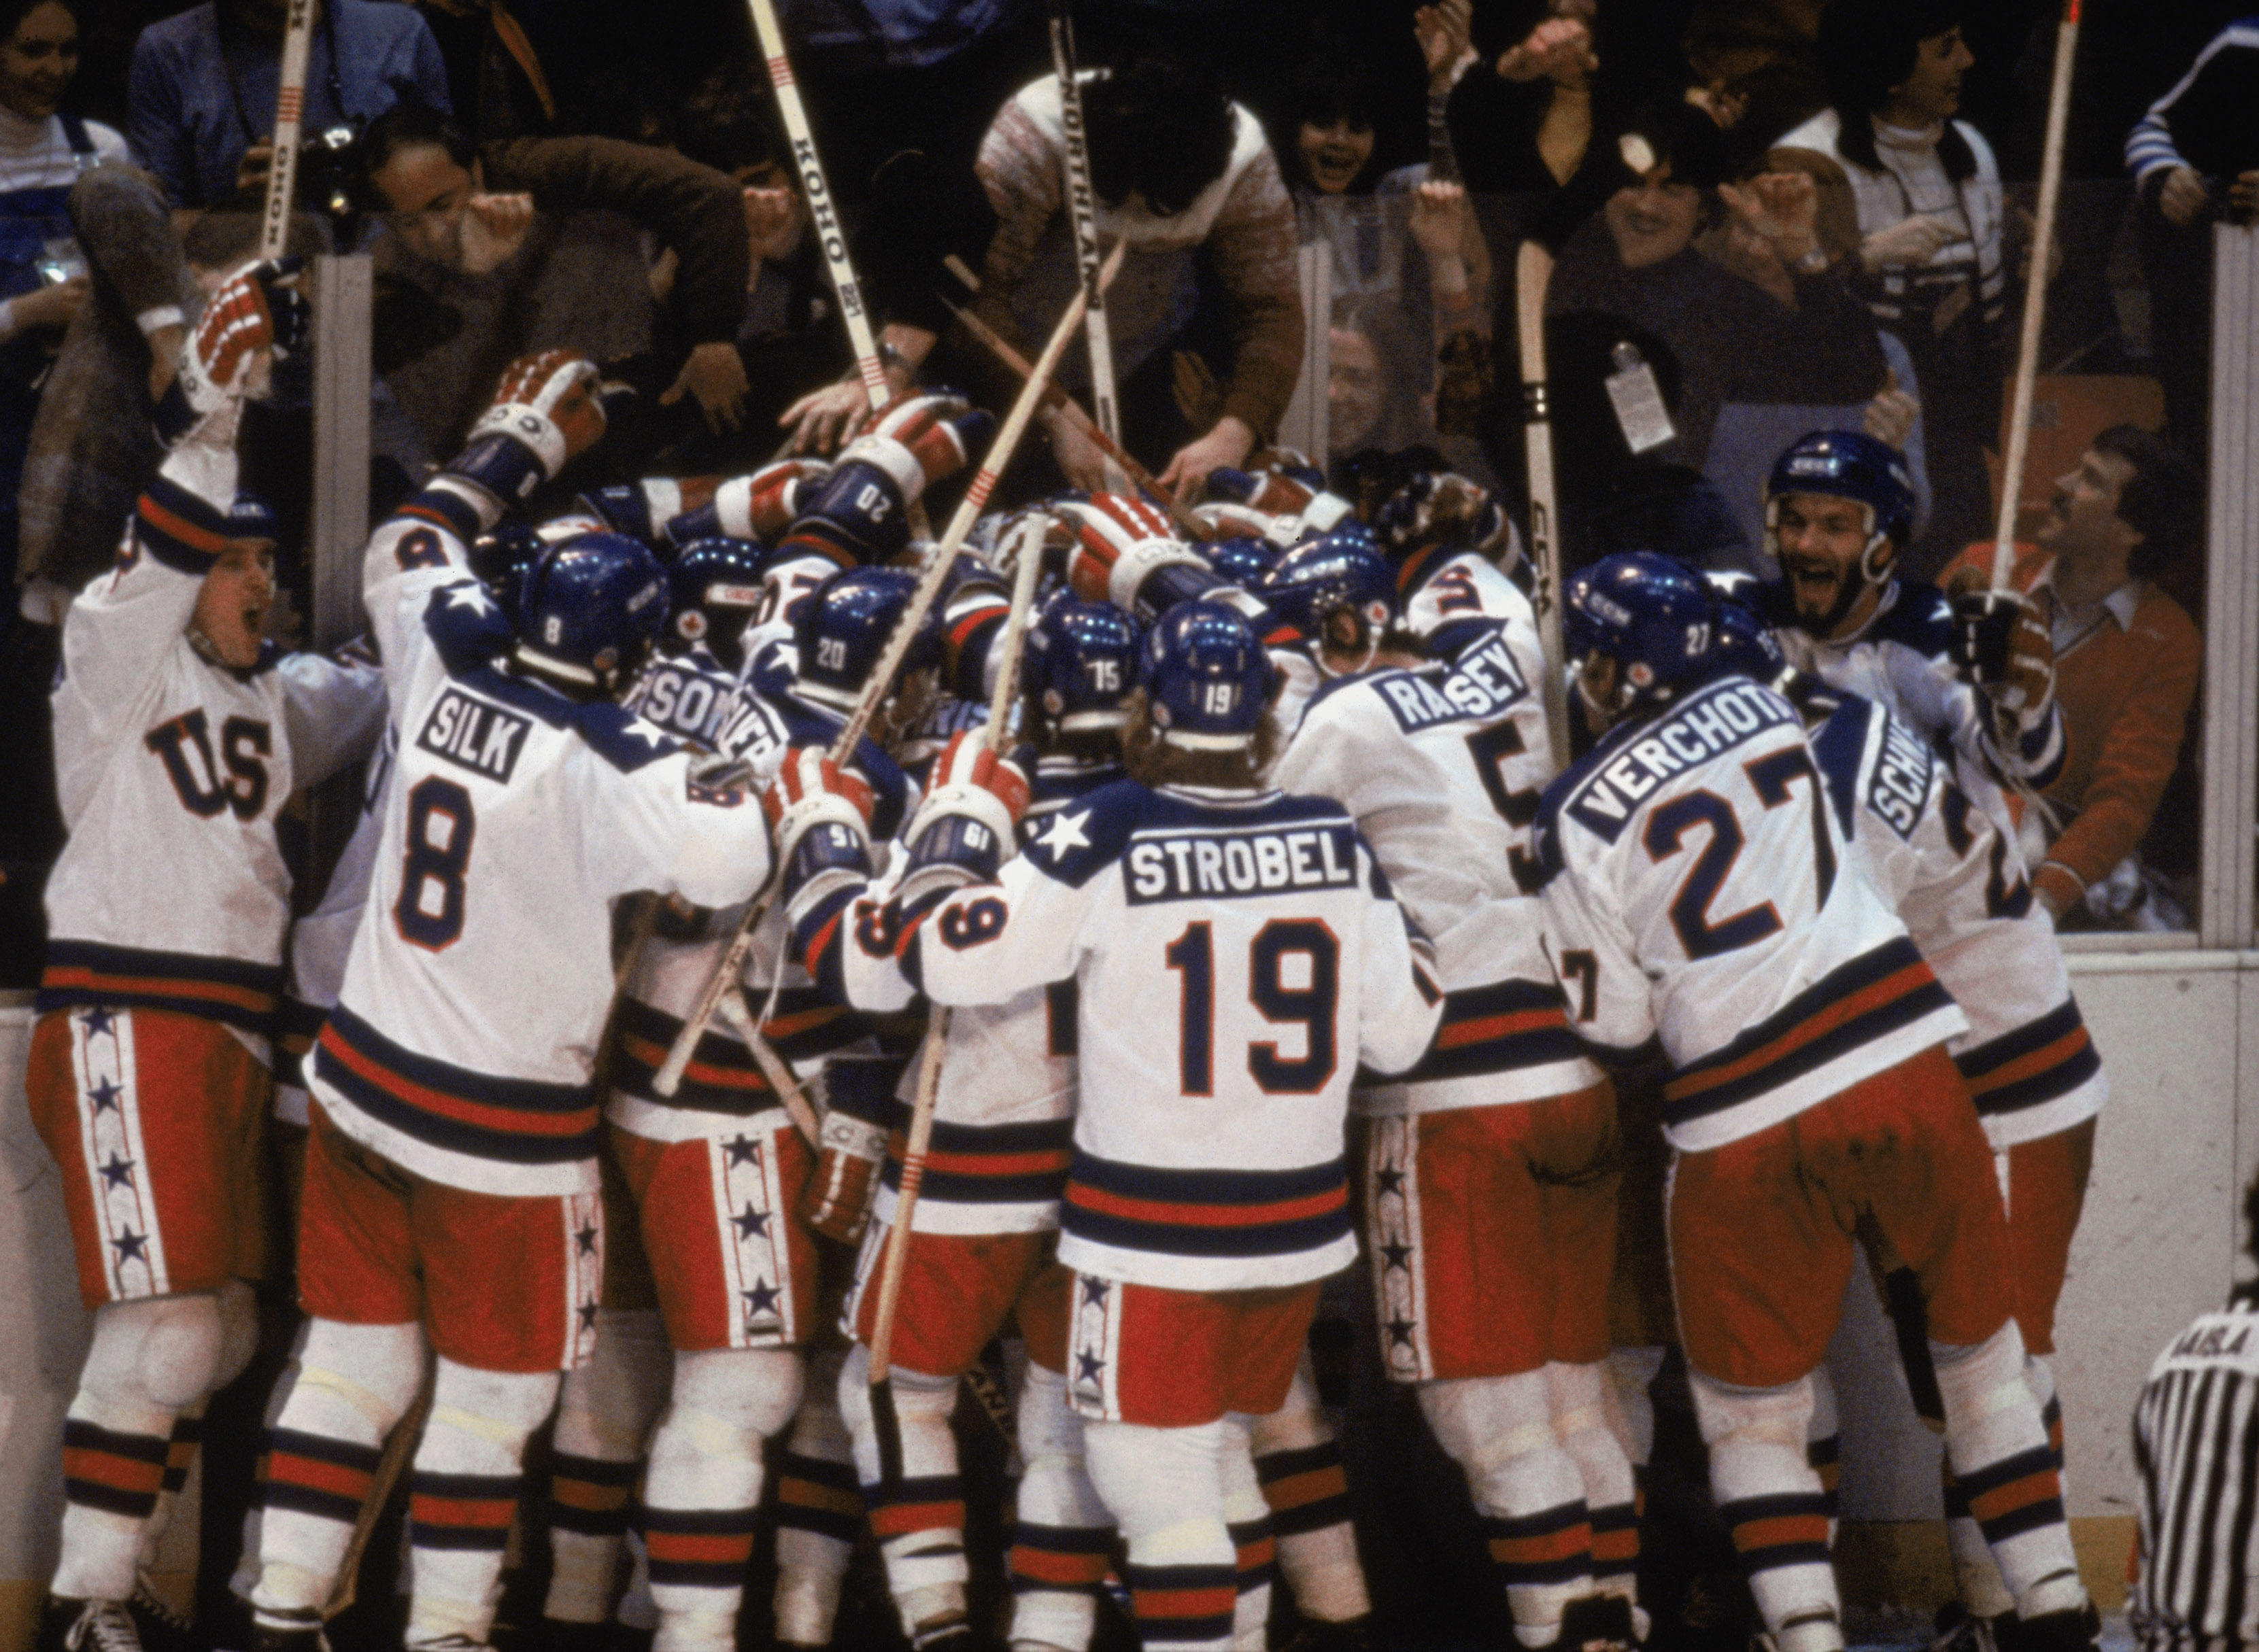 1980 US Olympic hockey team to relive Miracle on Ice moment